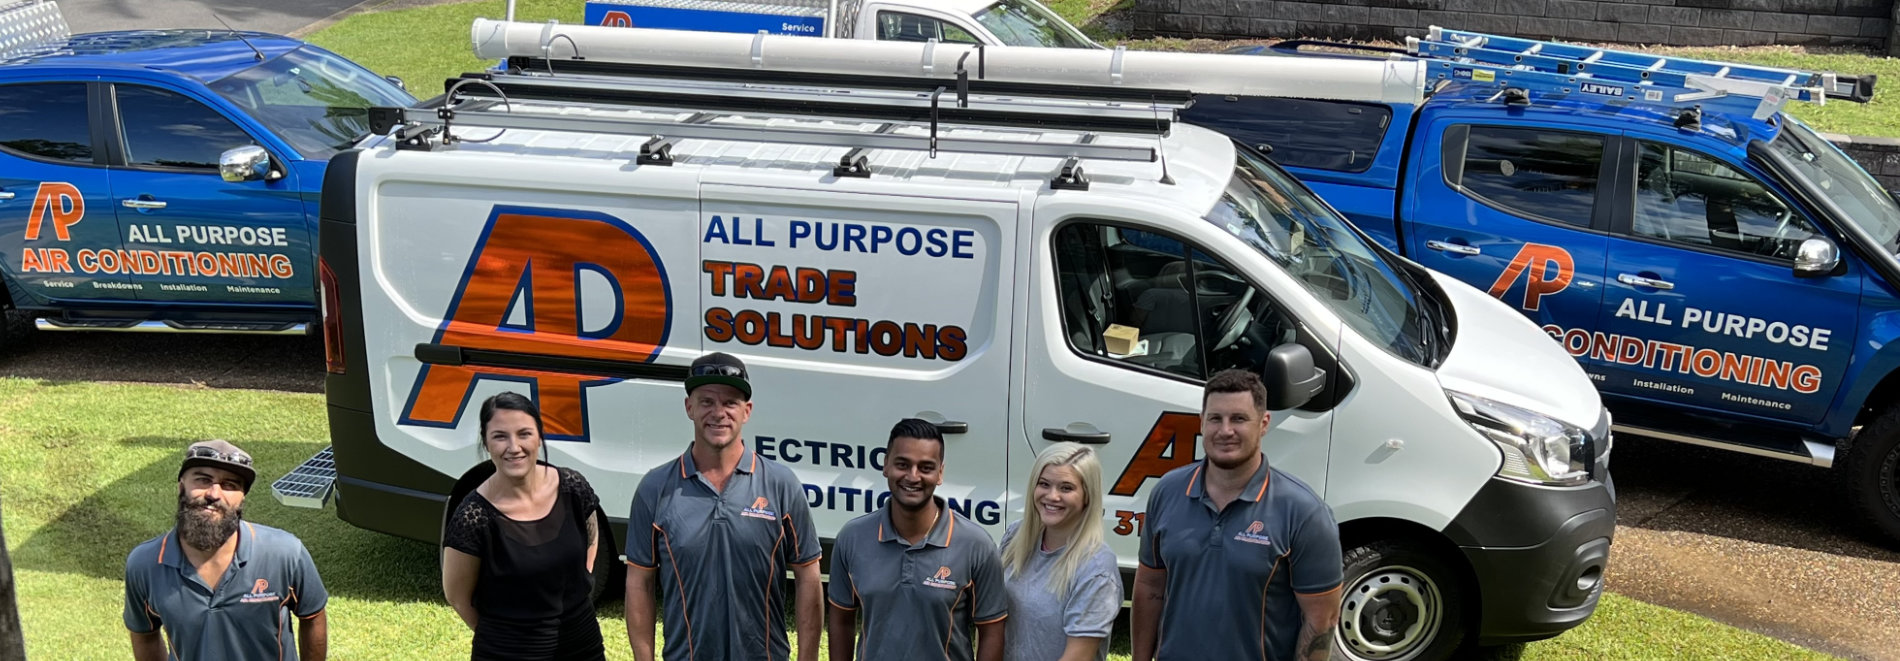 All Purpose Trade Solutions Air Conditioning Team stood with branded van